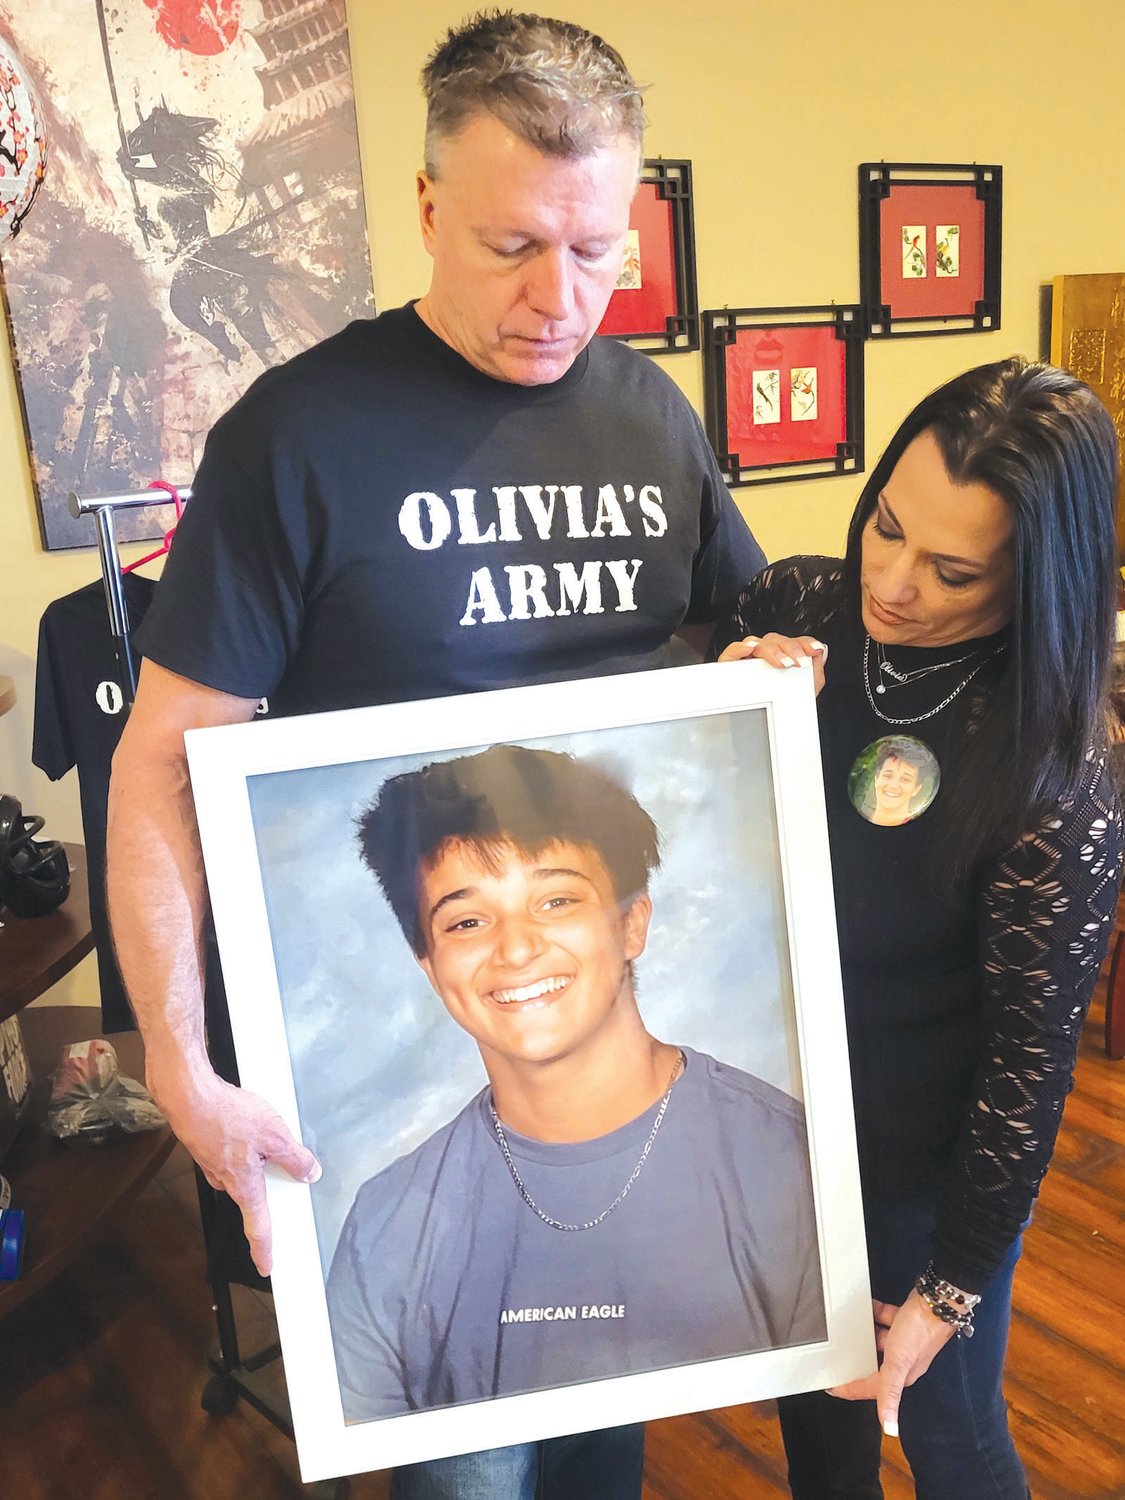 JUSTICE FOR OLIVIA: Dennis Molloy and Janine Passaretti-Molloy hold a portrait of their daughter, Olivia, who was killed in a crash on New Year’s Eve.